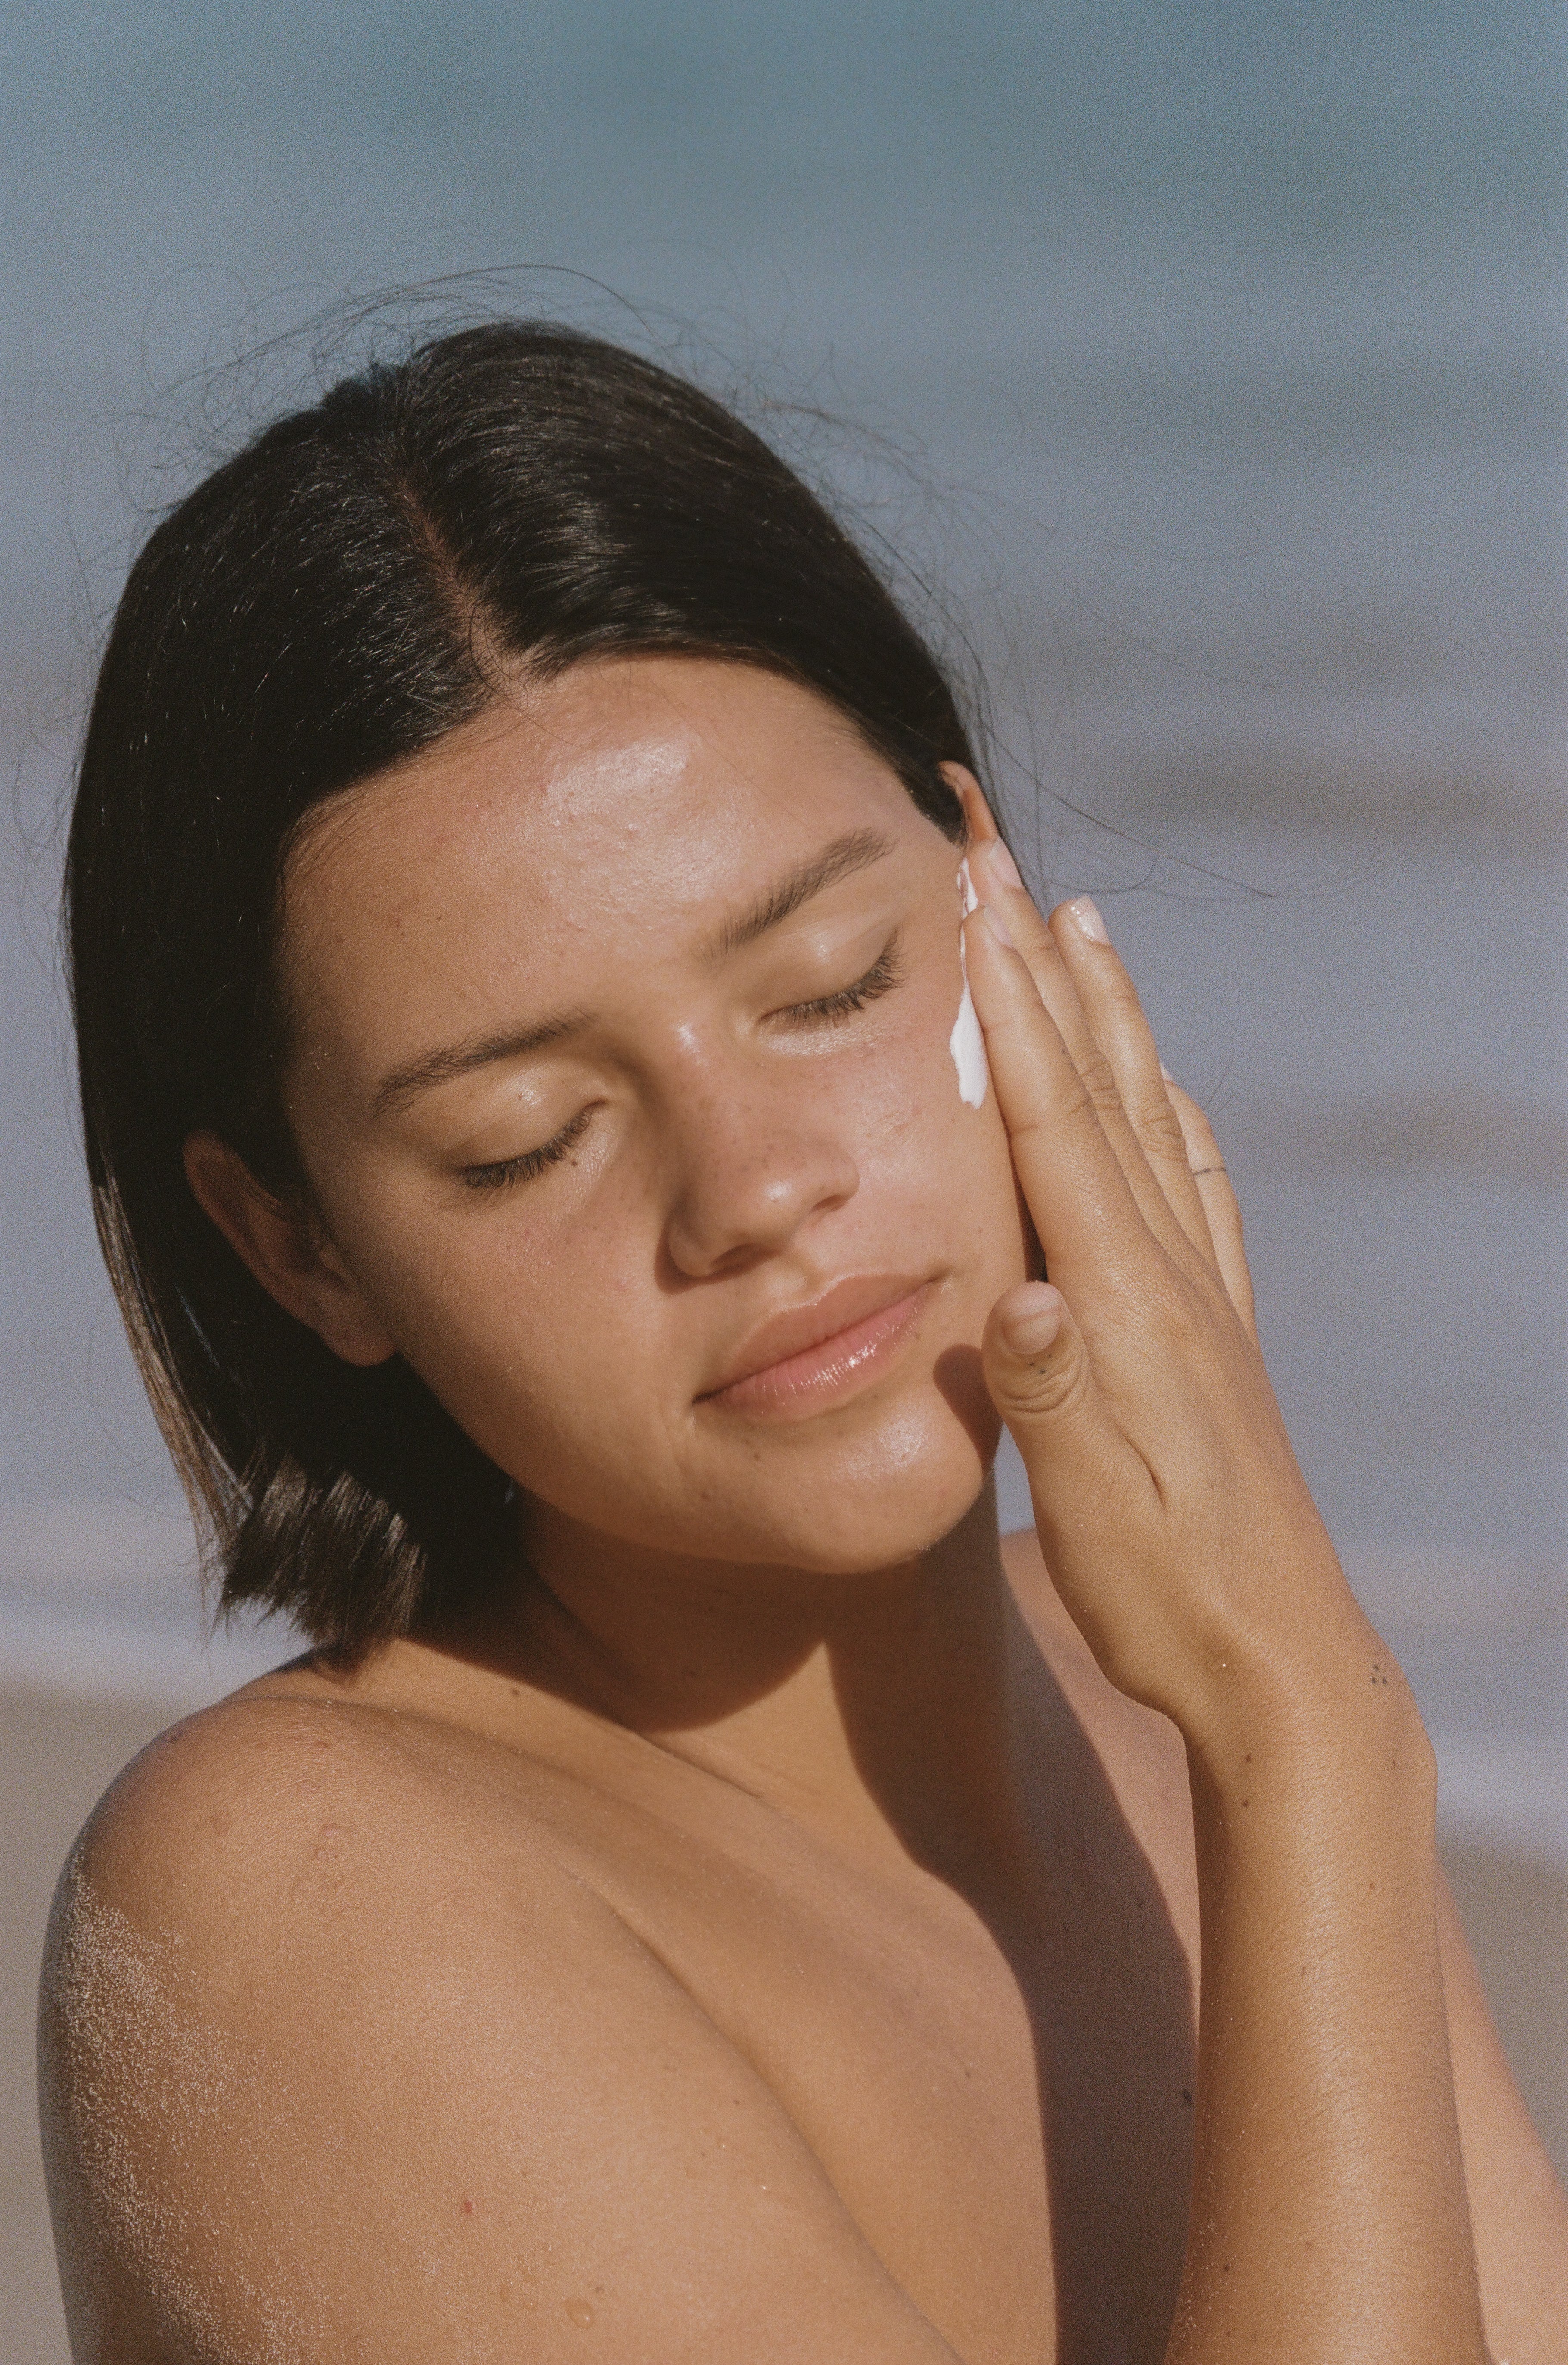 Tips for a safe Sun season: how to choose and use sunscreen